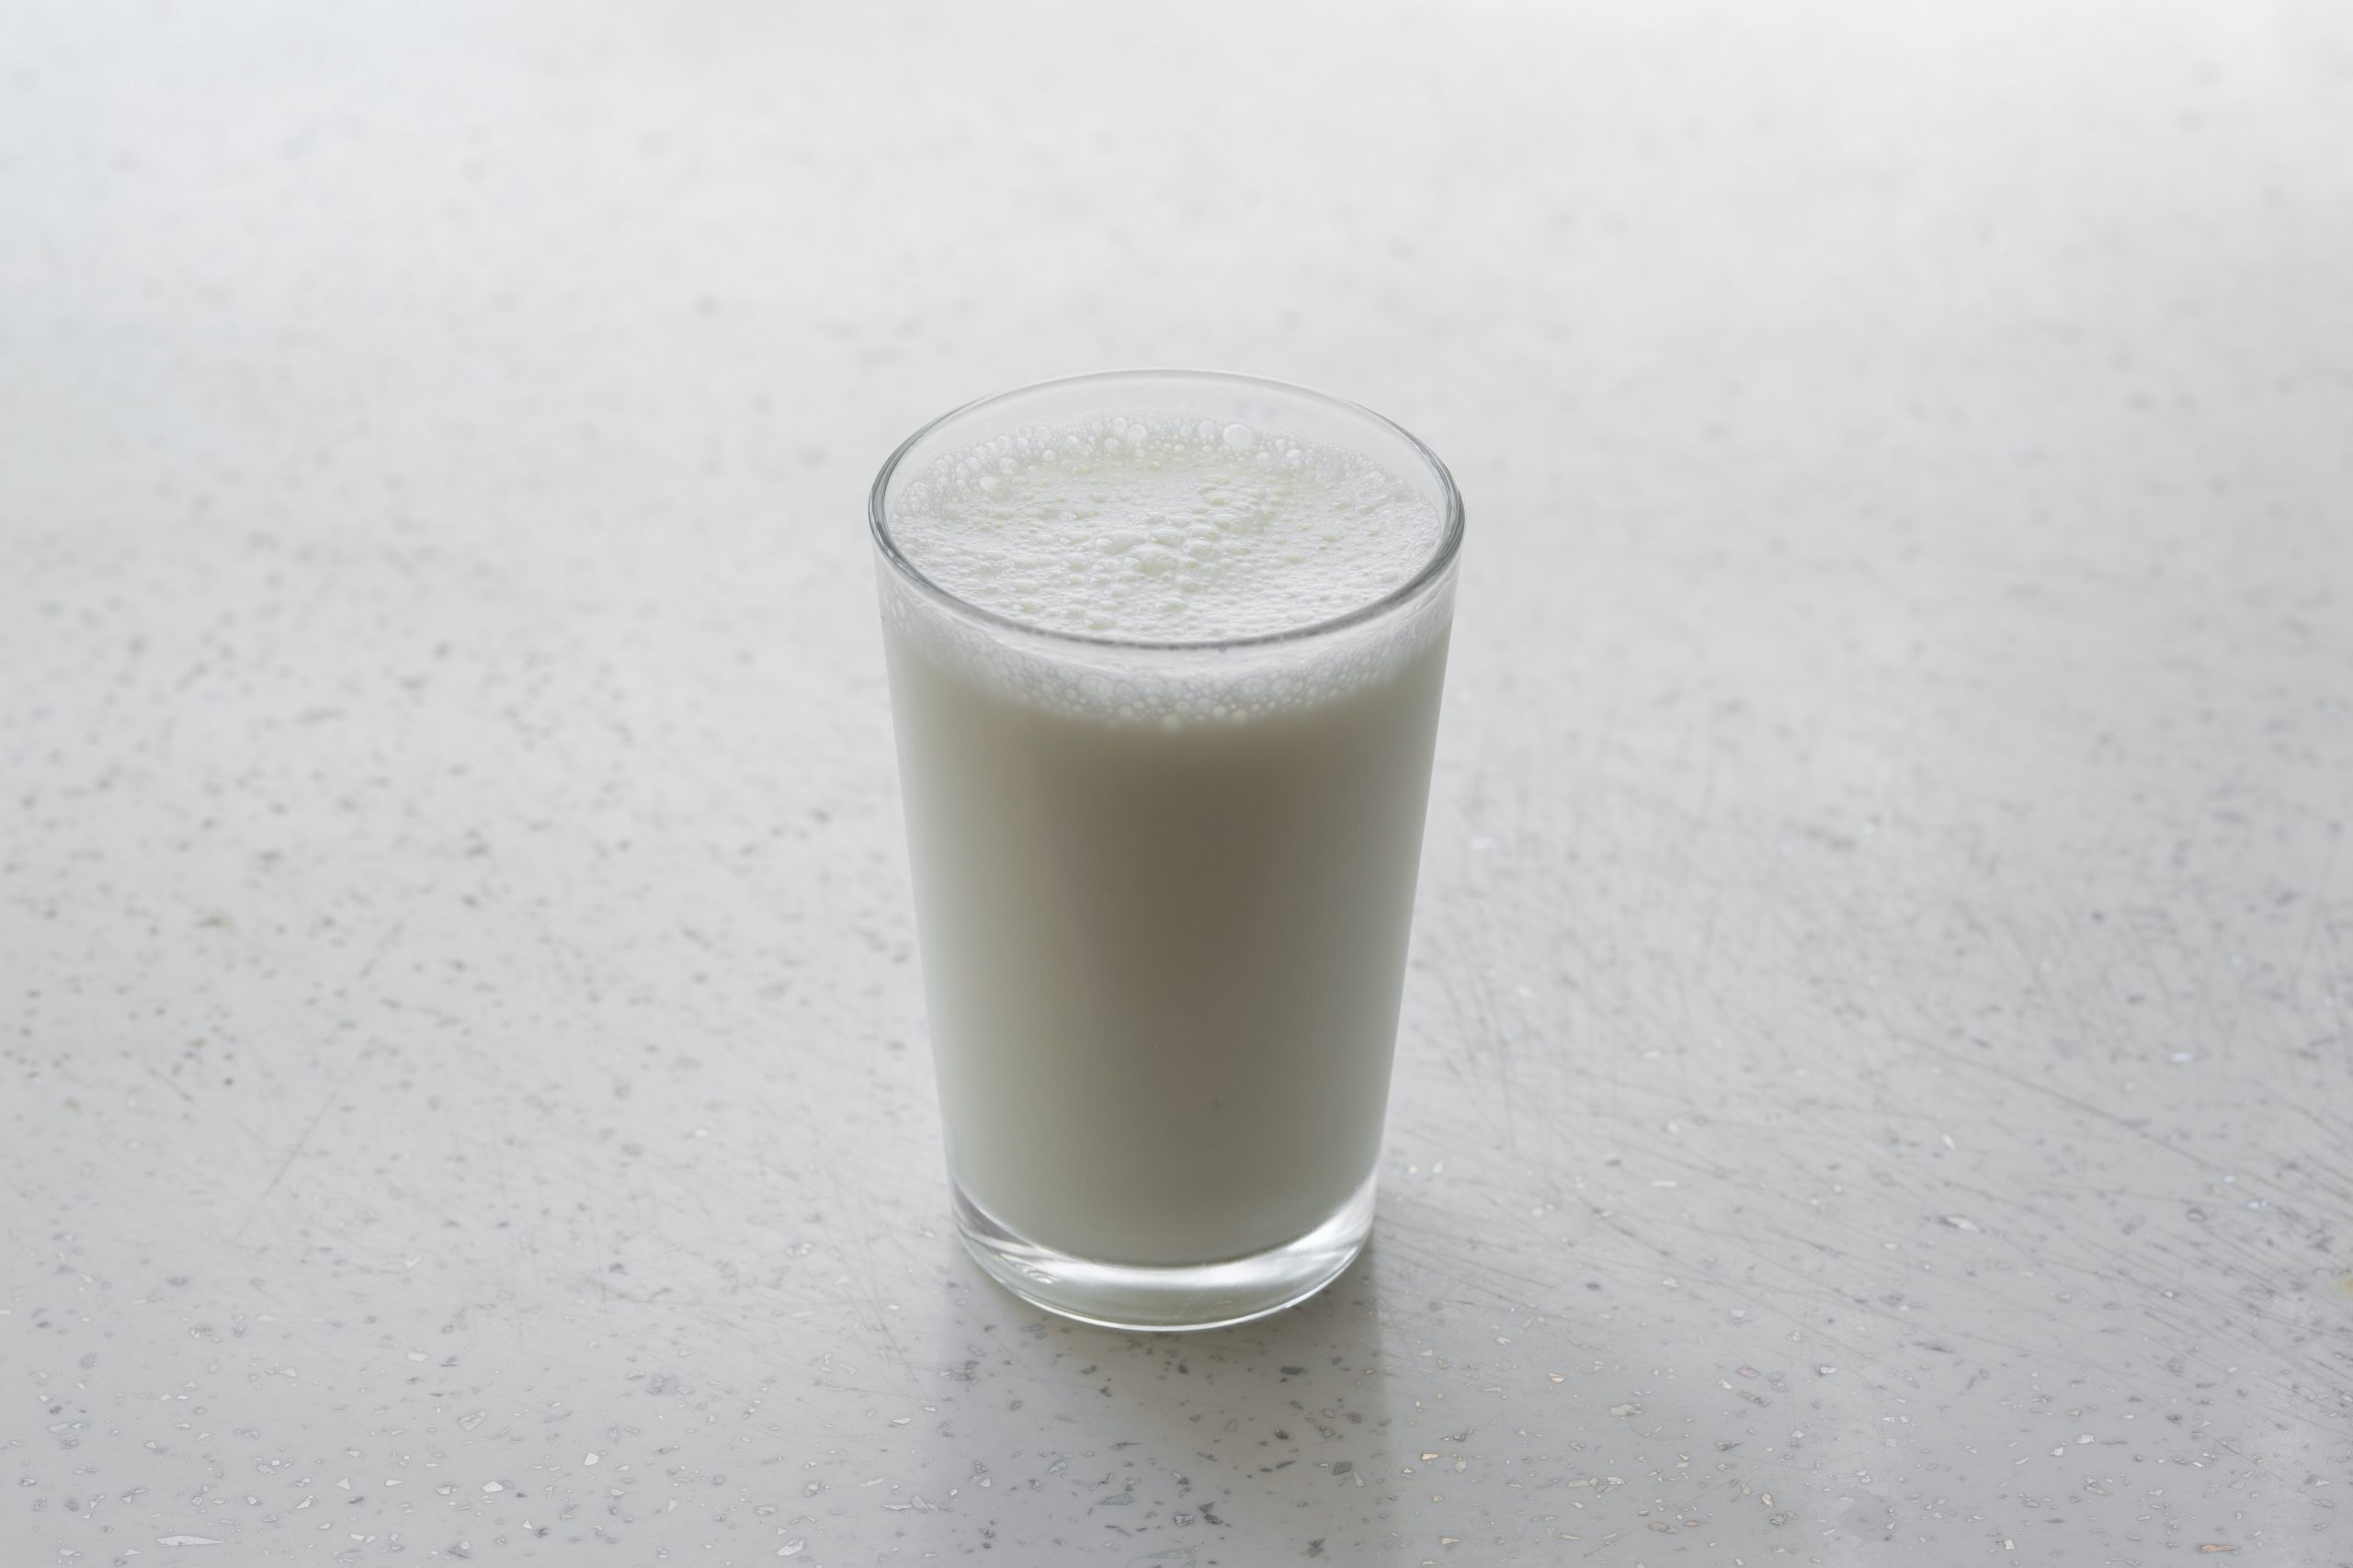 Glass of milk on a white flat surface